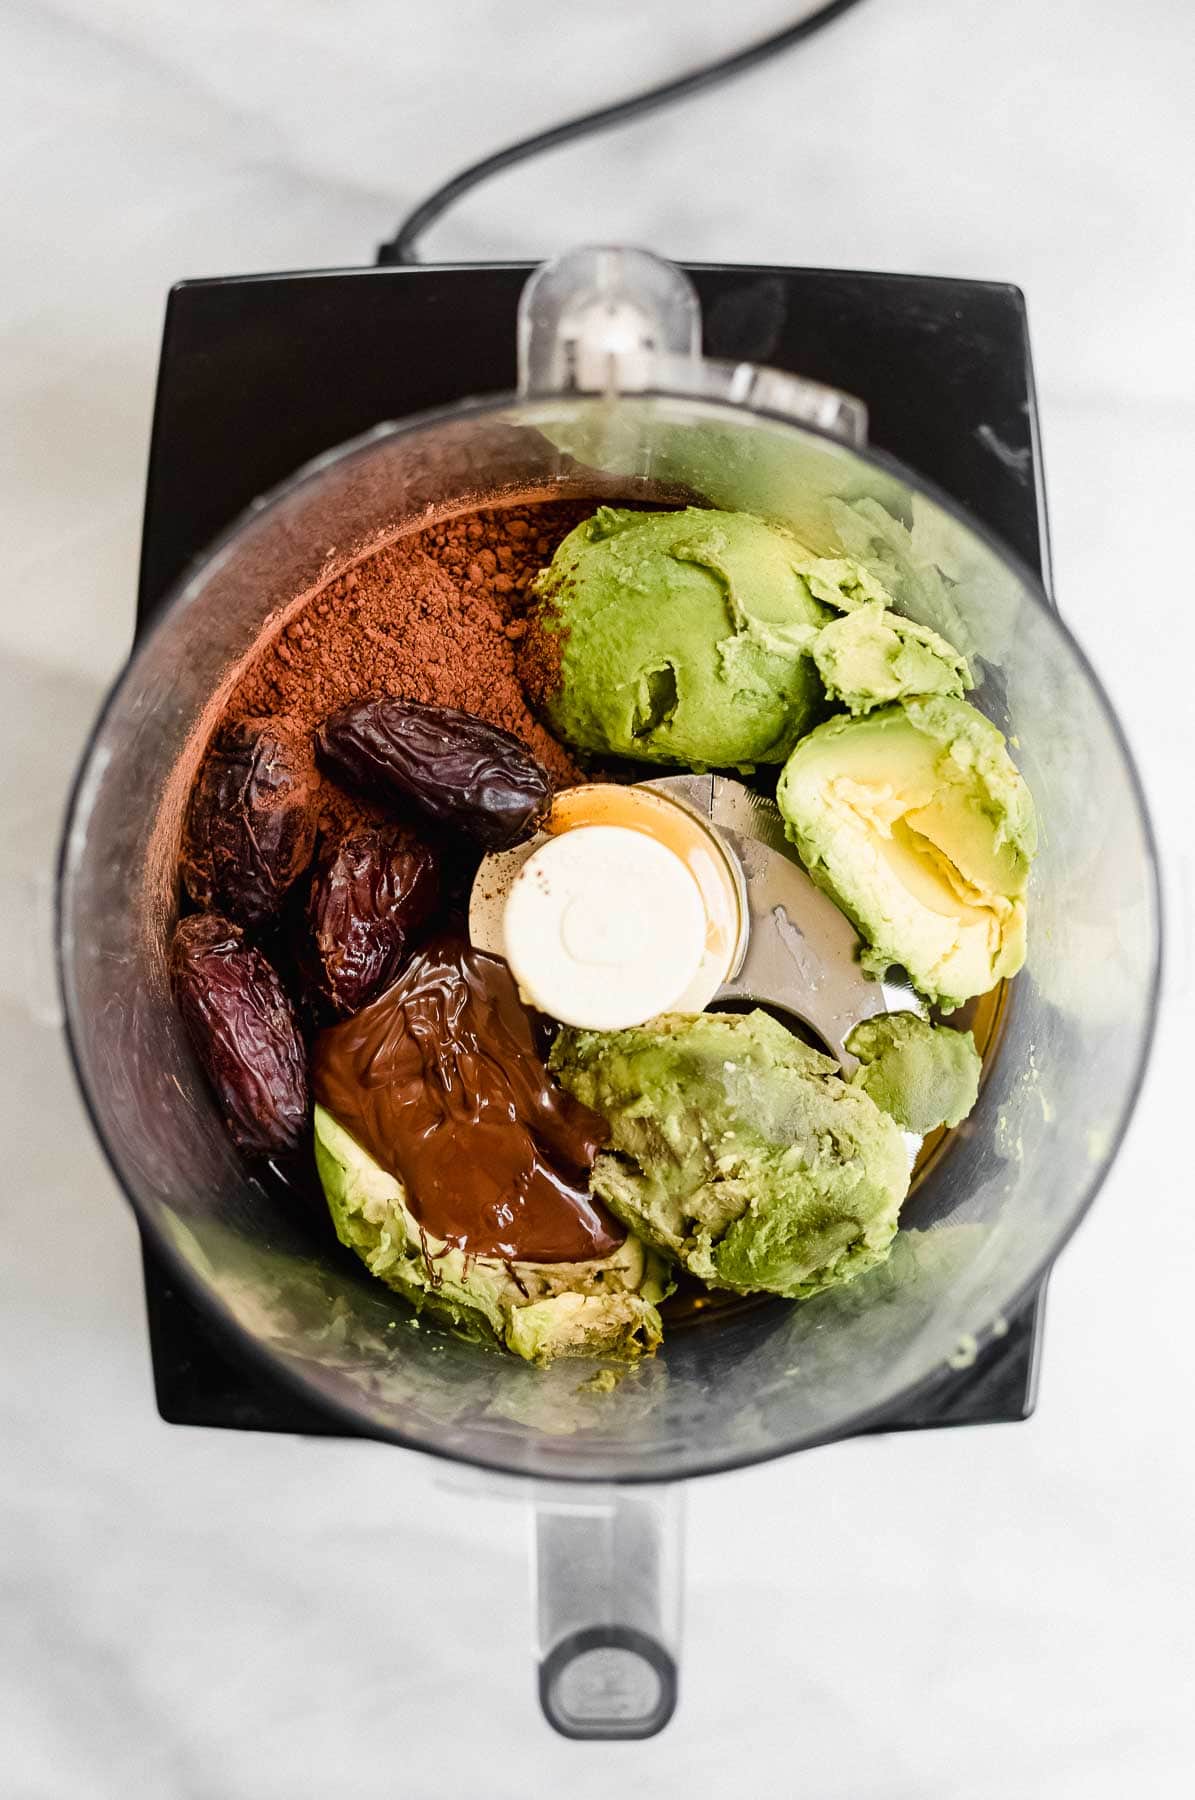 Ingredients for the avocado mousse in a food processor.